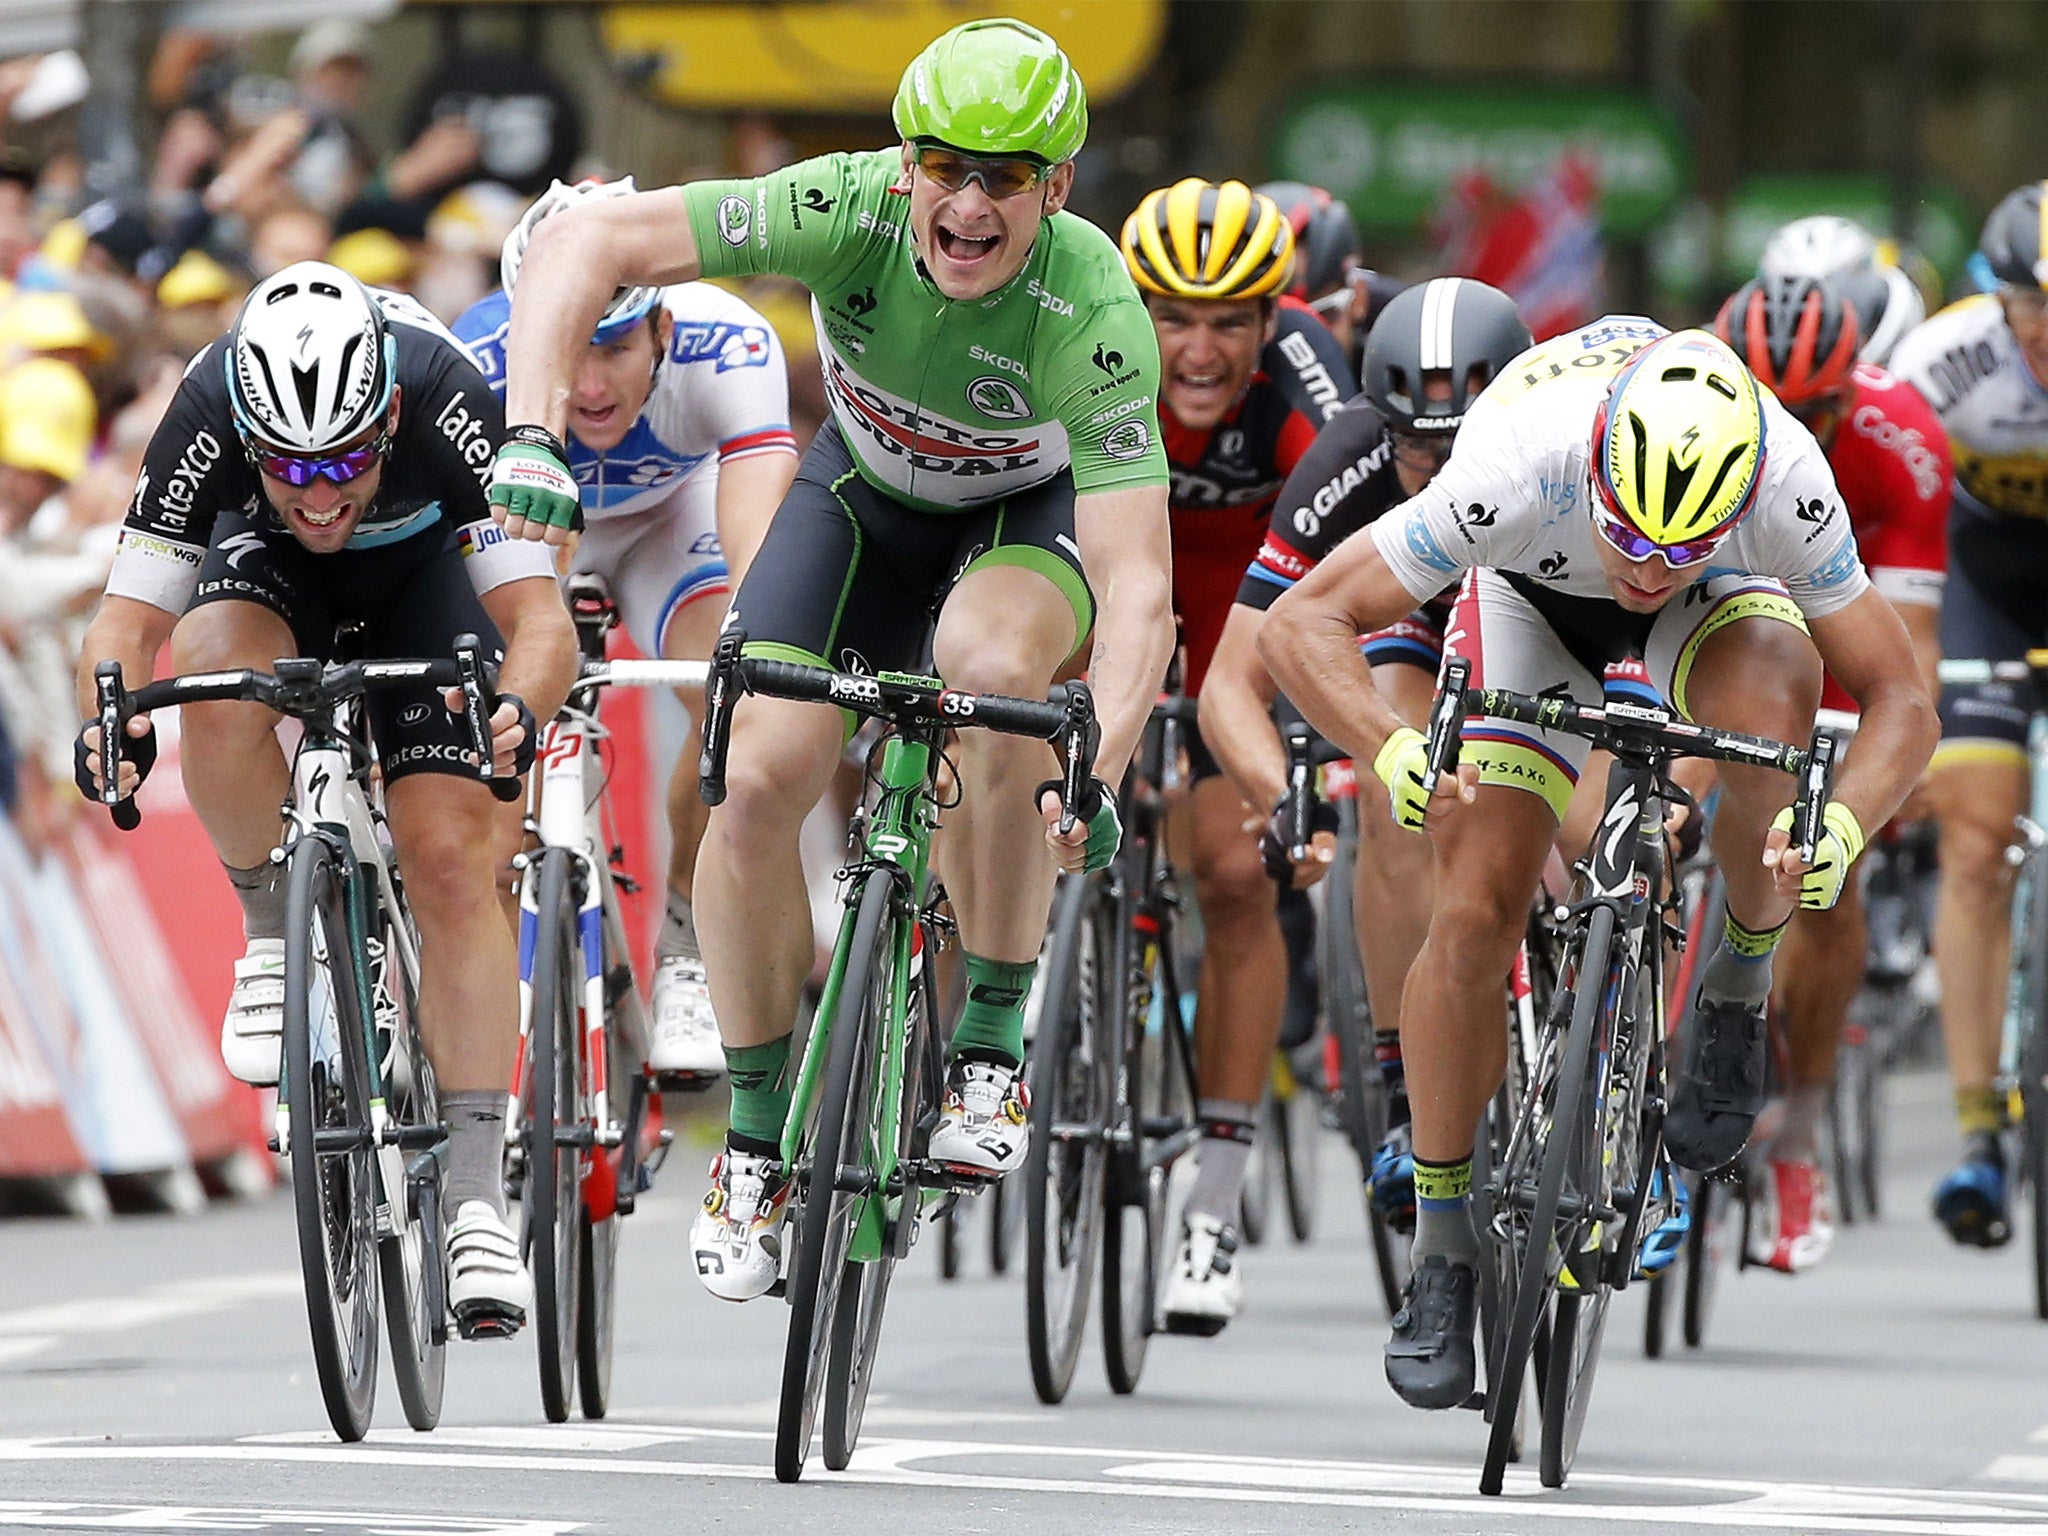 André Greipel starts to celebrate as he crosses the finish line ahead of Mark Cavendish (left) and Peter Sagan (right) to win the fifth stage of the Tour de France